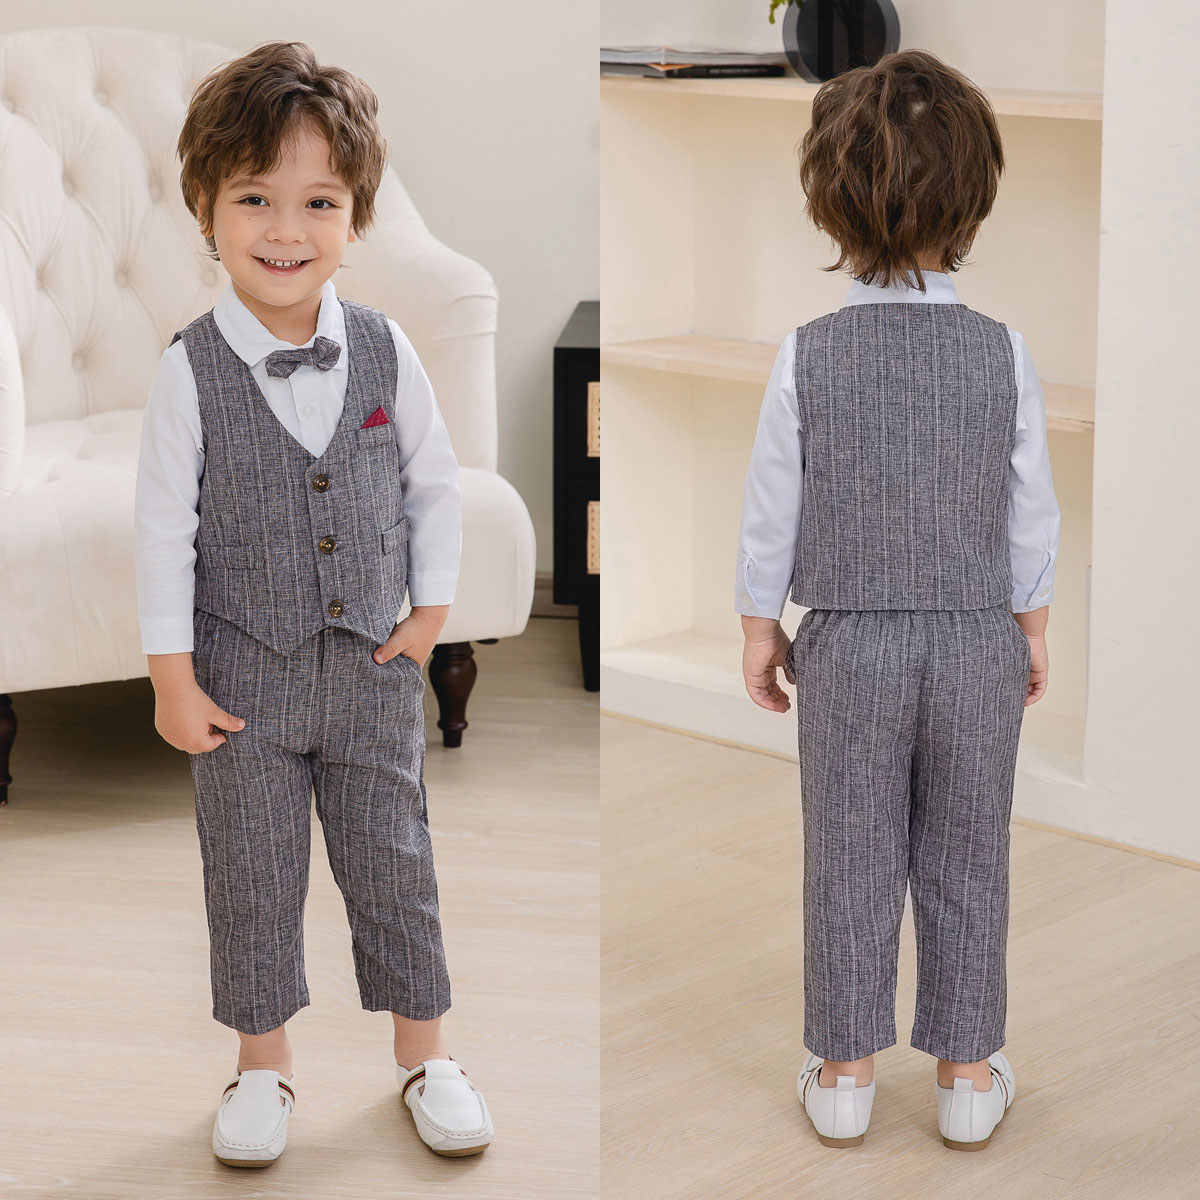 Three Piece British Gentleman Party Suit Set With Bow Tie For Small Boys Suitable for Spring, Autumn and Winter